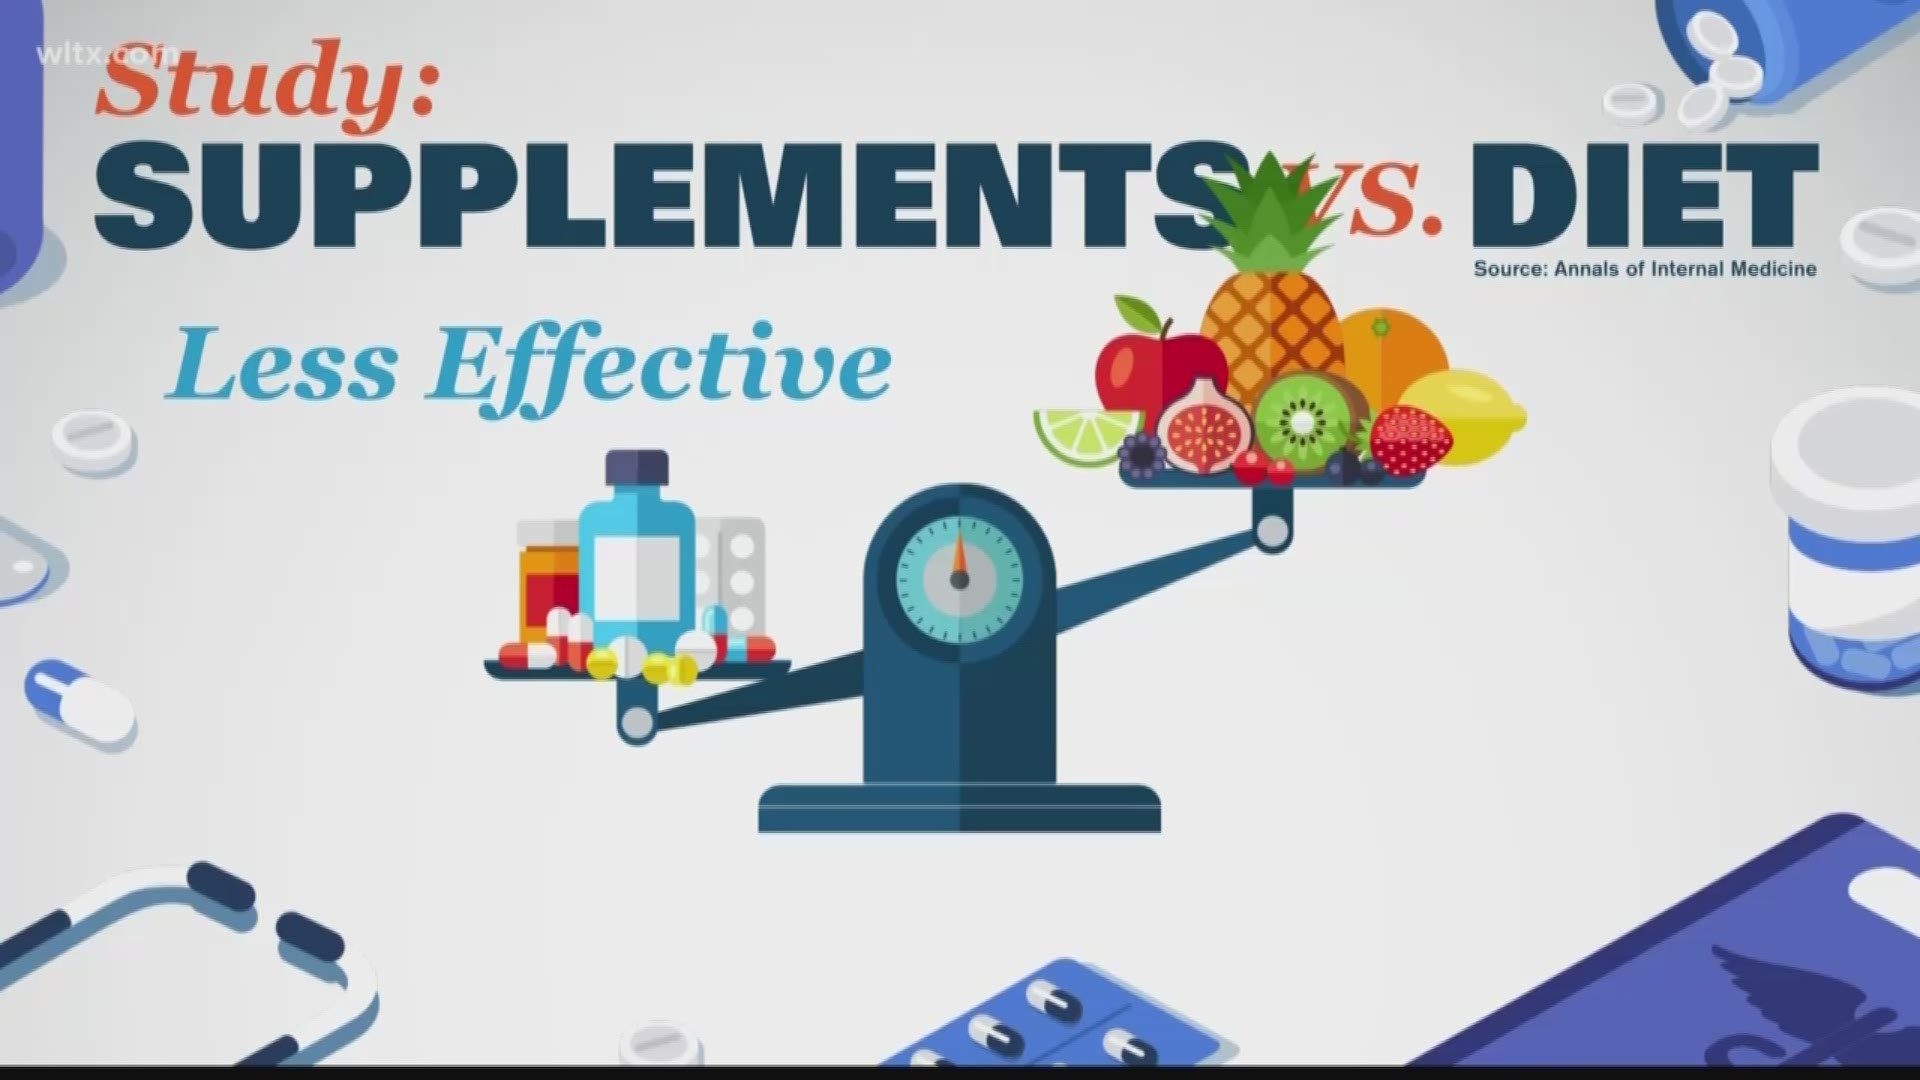 According to the Council for Responsible Nutrition  75% of U.S. adults take a dietary supplement of some kind.